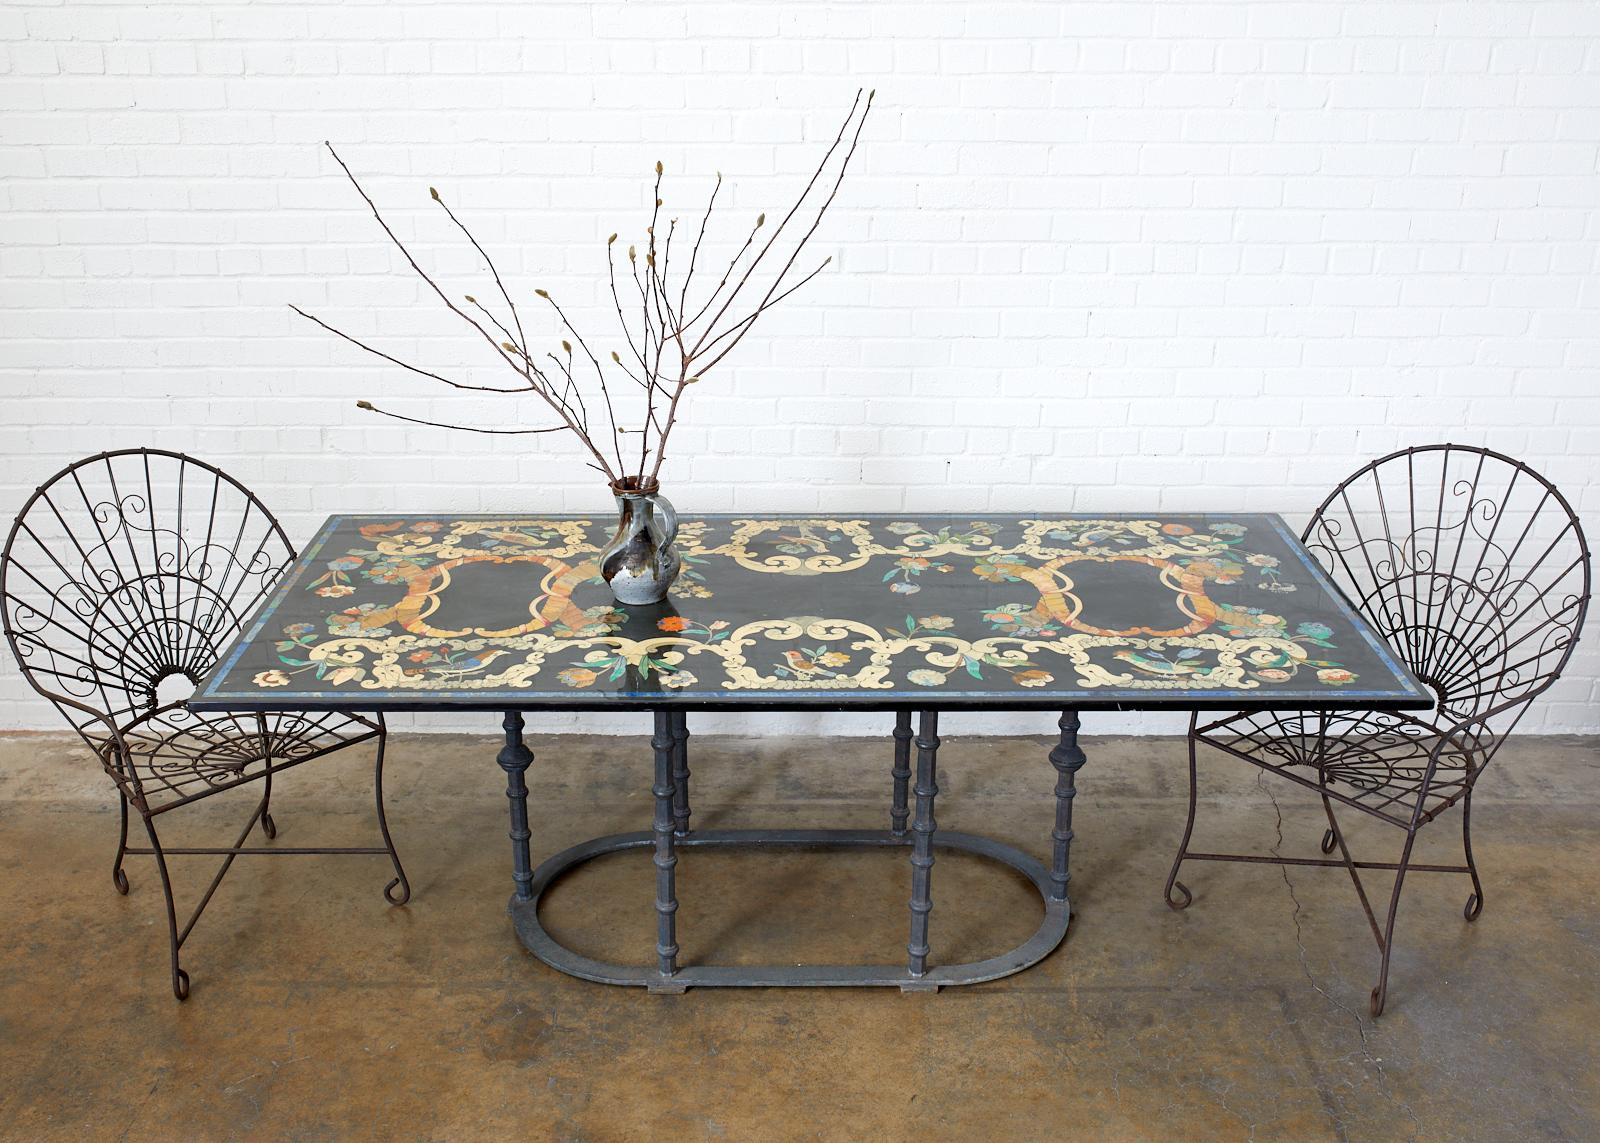 Dramatic Italian Florentine garden table or dining table featuring a handcrafted Scagliola marble top decorated with neoclassical motif inlay. The heavy slab top is nearly 1 inch thick and is supported by a heavy oval iron base. The base was custom